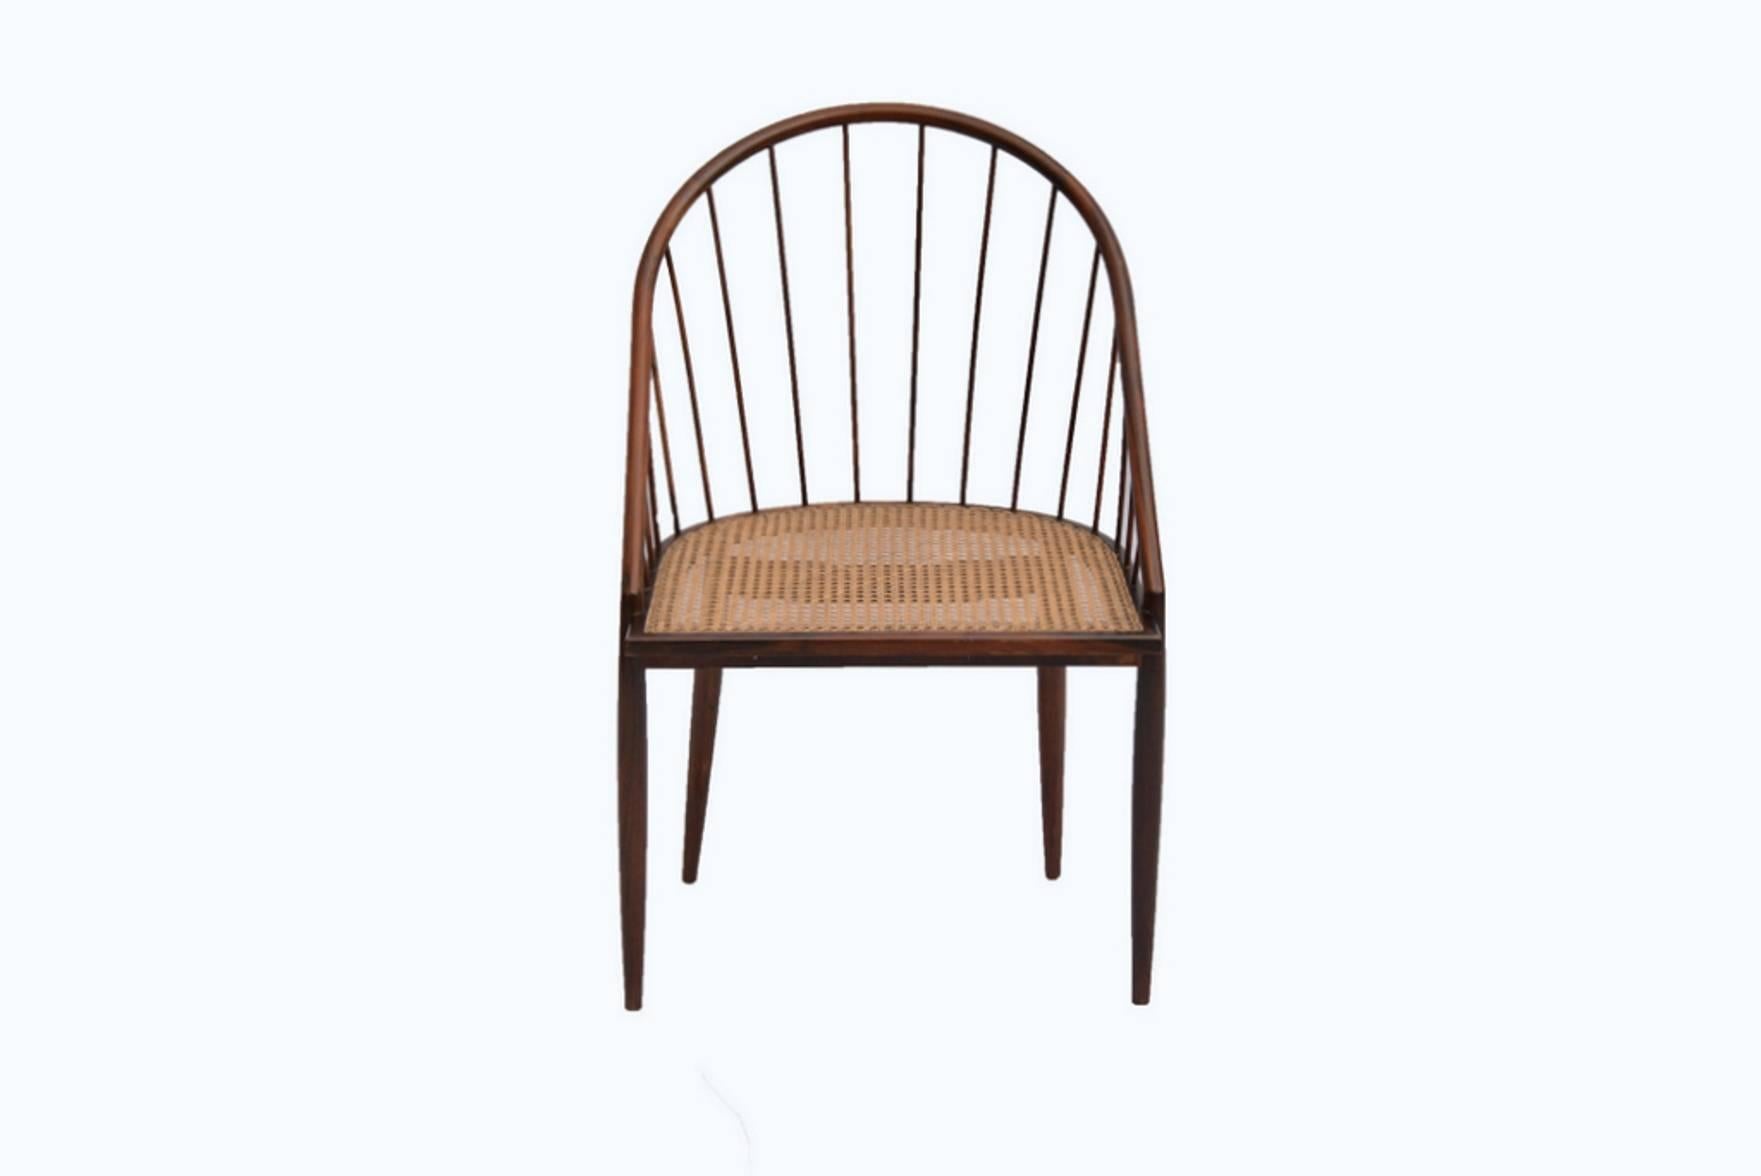 Set of 12 original curved chairs in Jacaranda wood and caned D-shape seating.